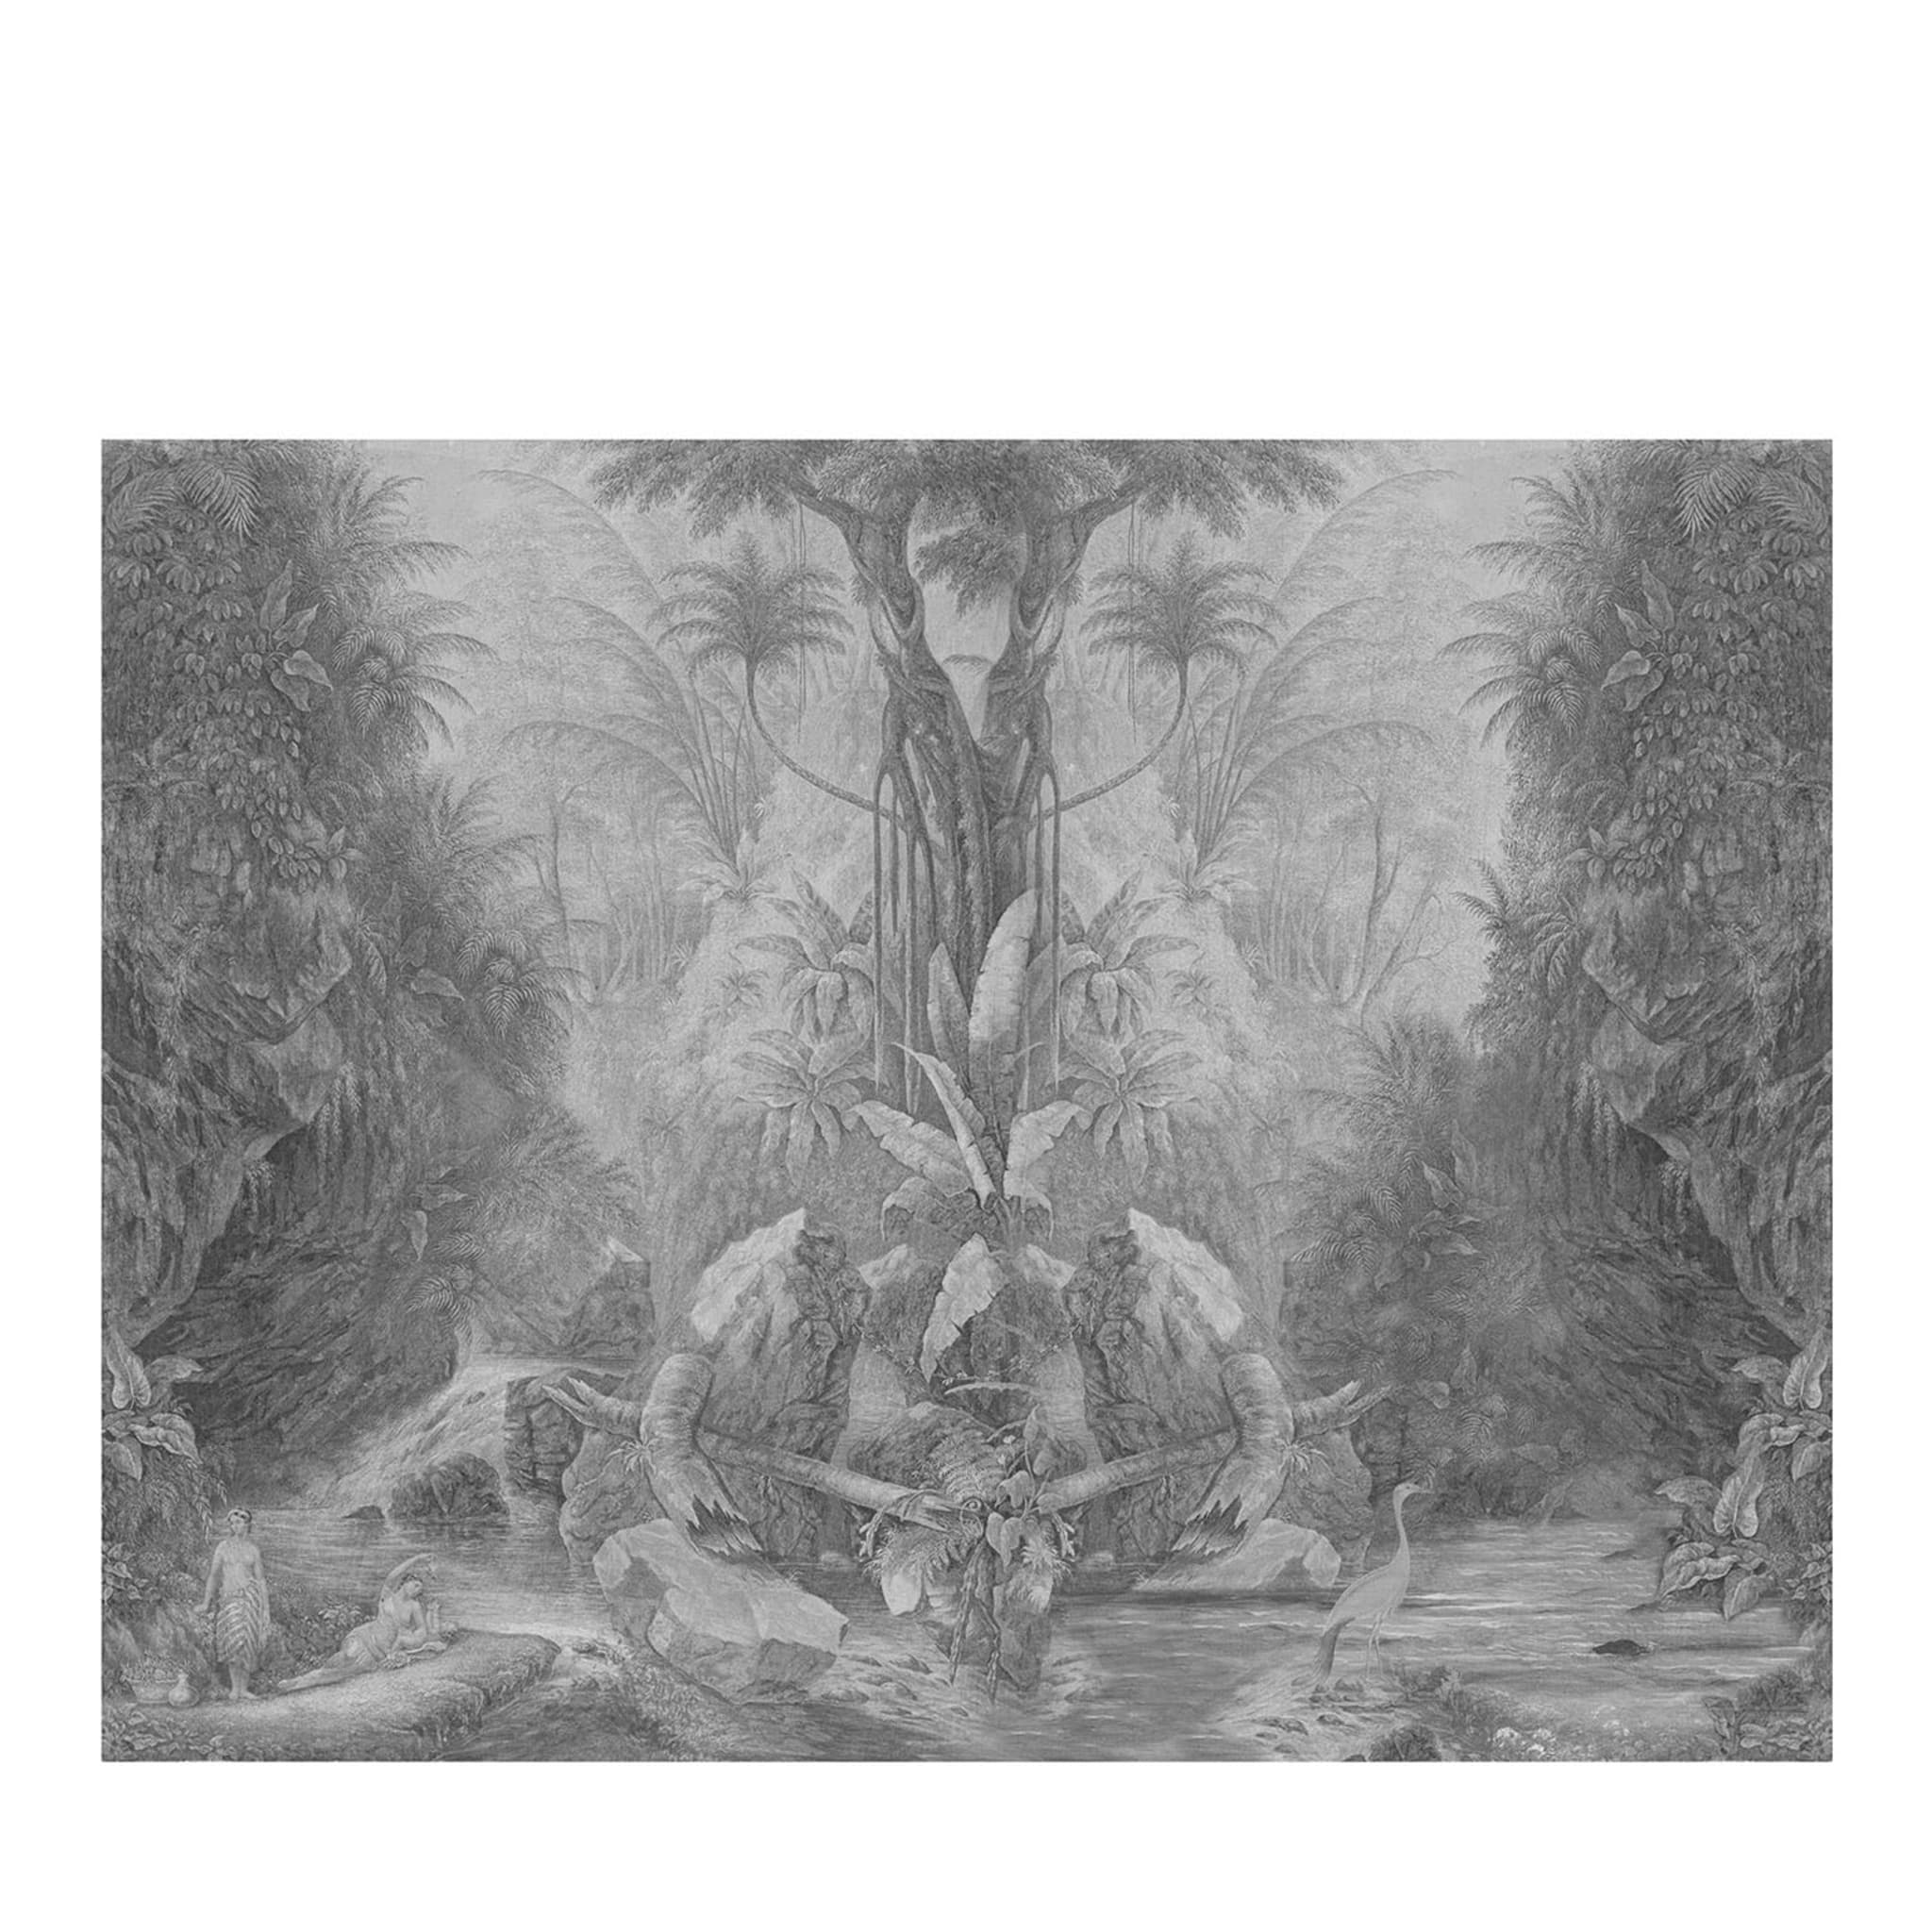 B&W Silky Jungle Wallpaper Camere Collection - Main view